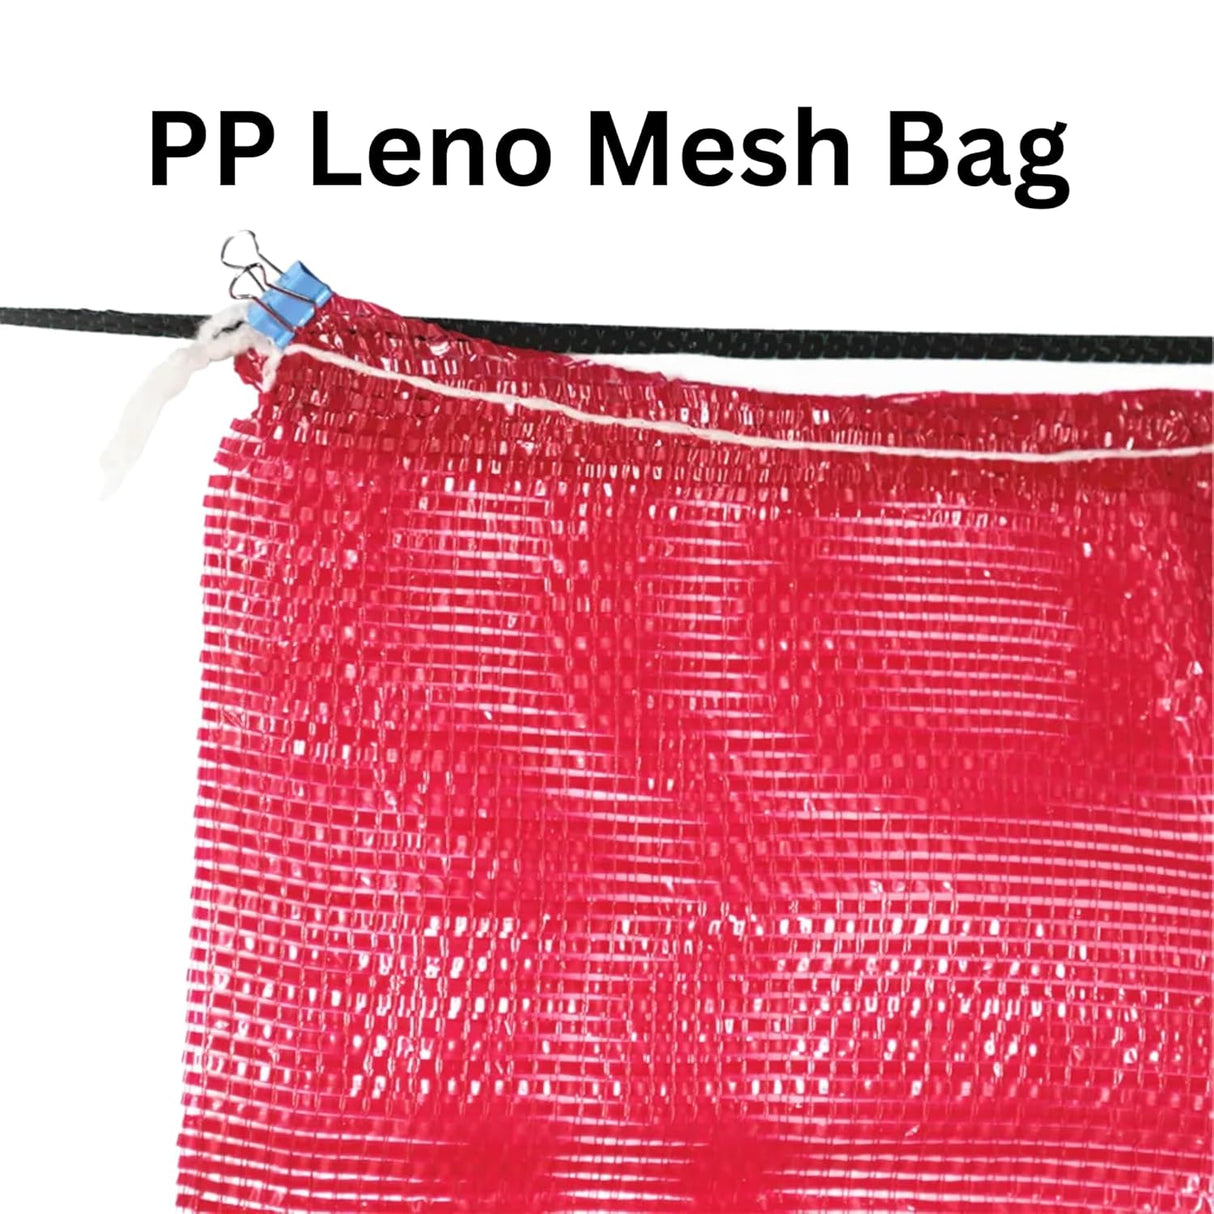 SINGHAL Leno Mesh Storage Produce Bags Reusable for Vegetable Storage Bags Onion Storage Washable Net Bags (14x24 Inch - Yellow, 50)